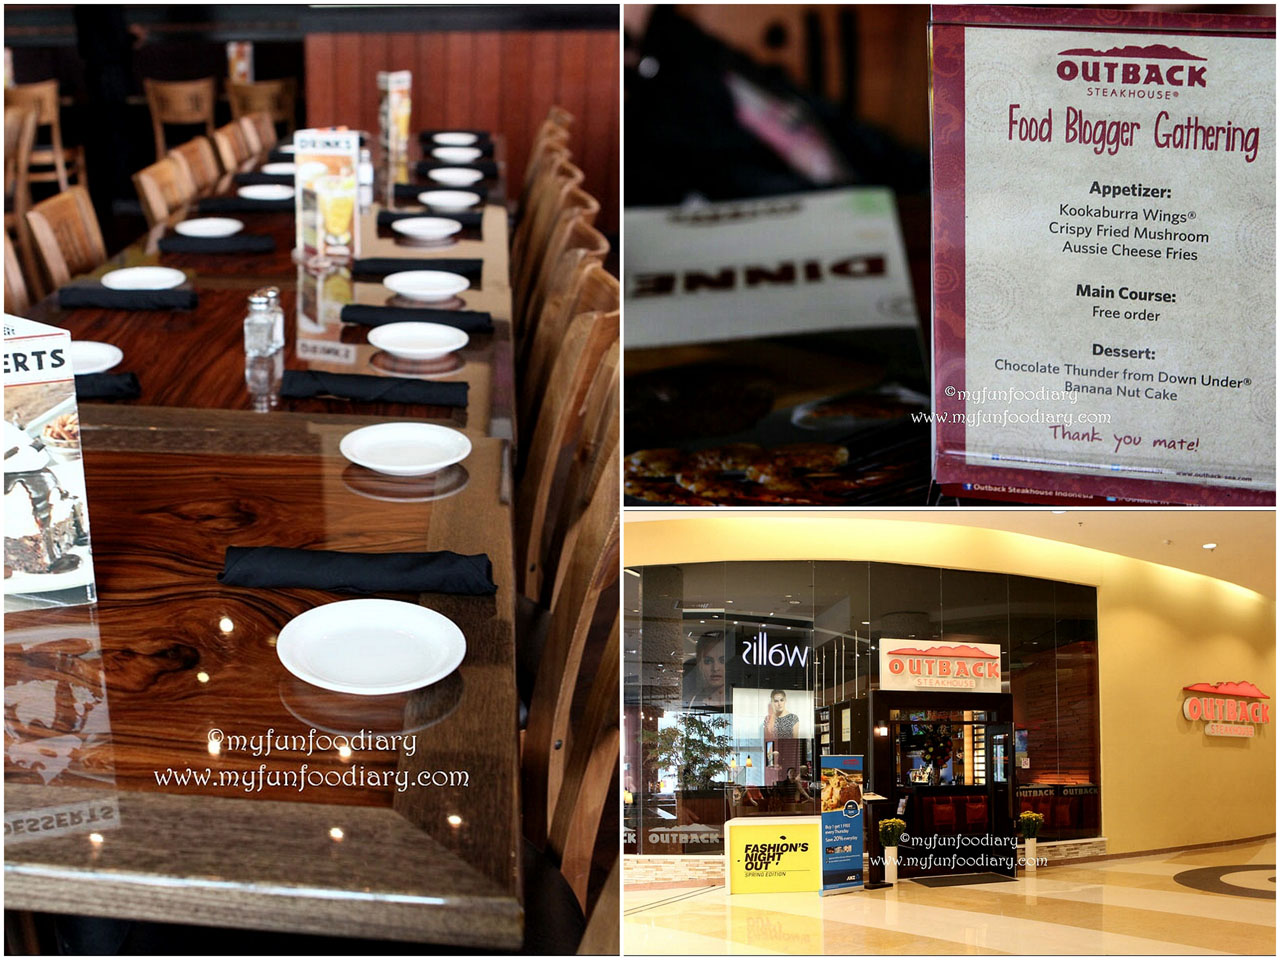 Food Blogger Gath at Outback Steakhouse